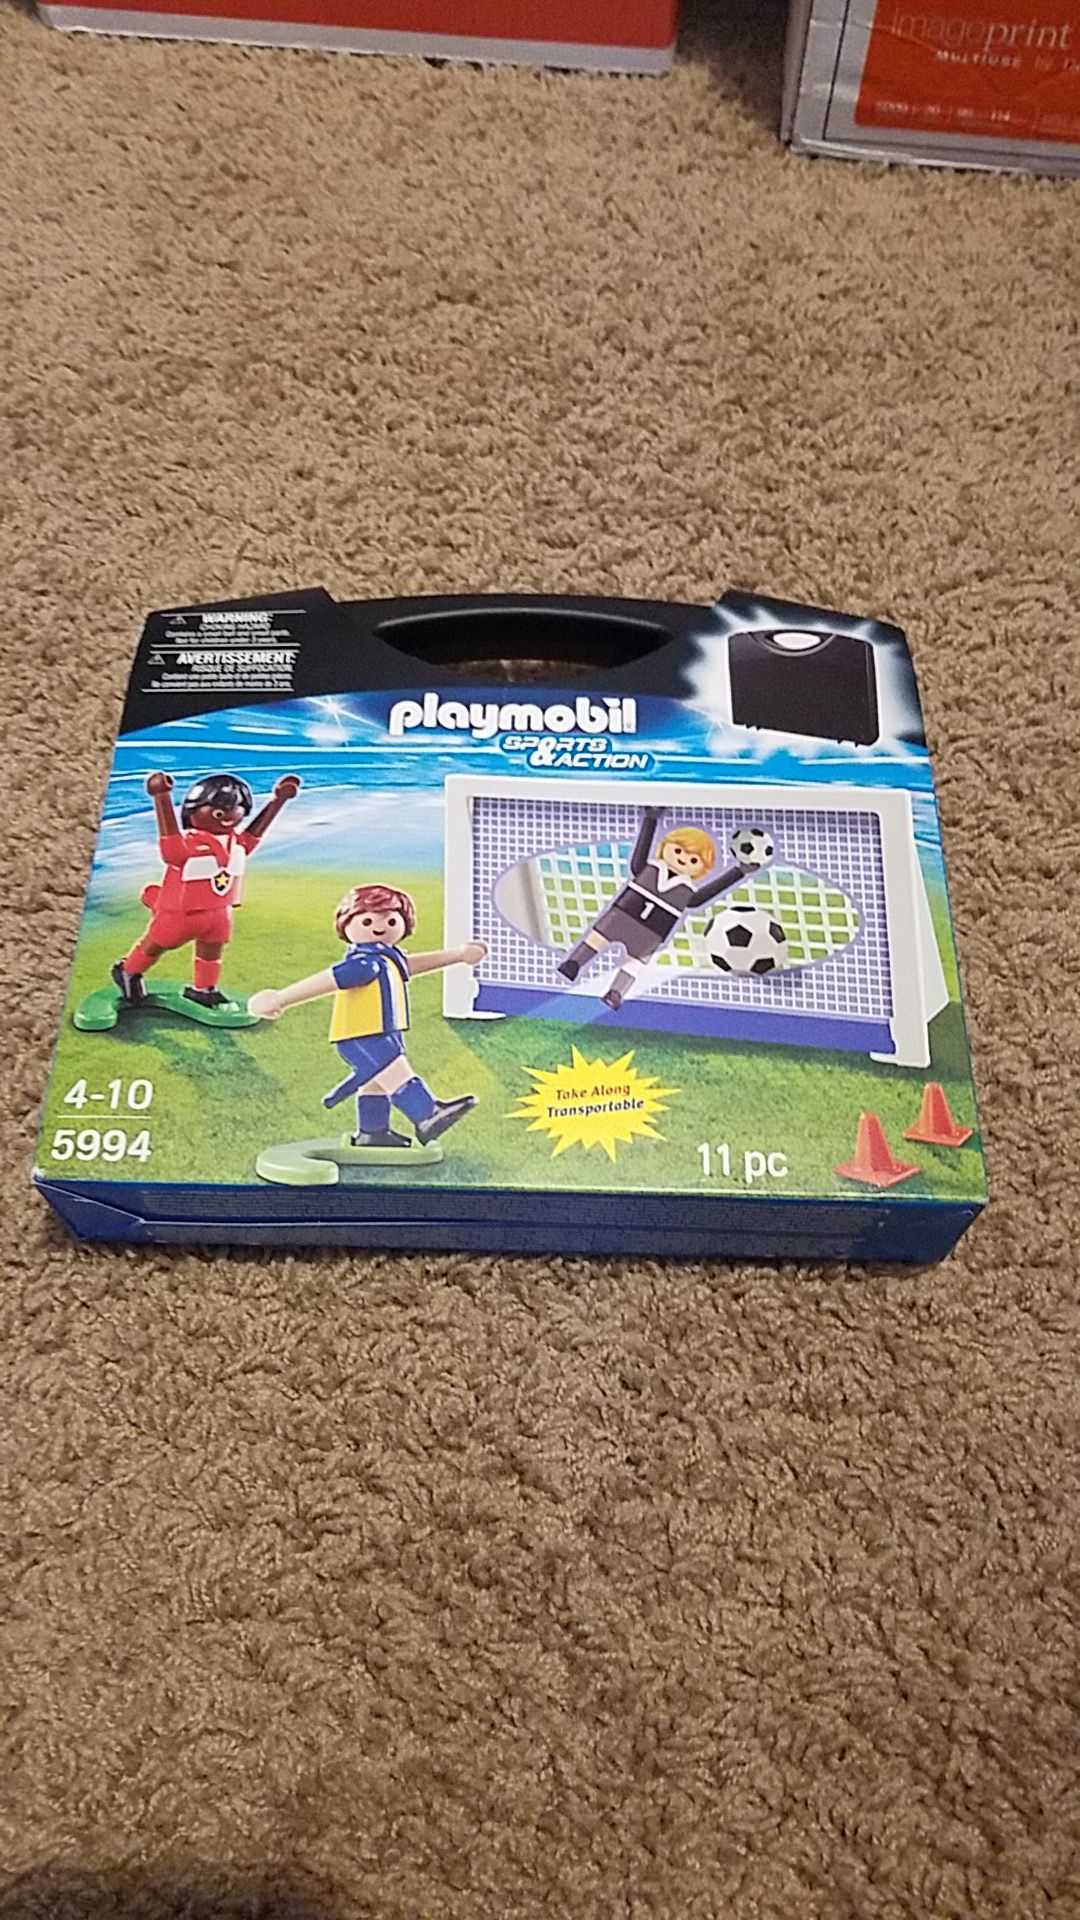 Playmobil Sports & Action Portable Kit Sealed in Original Carrier